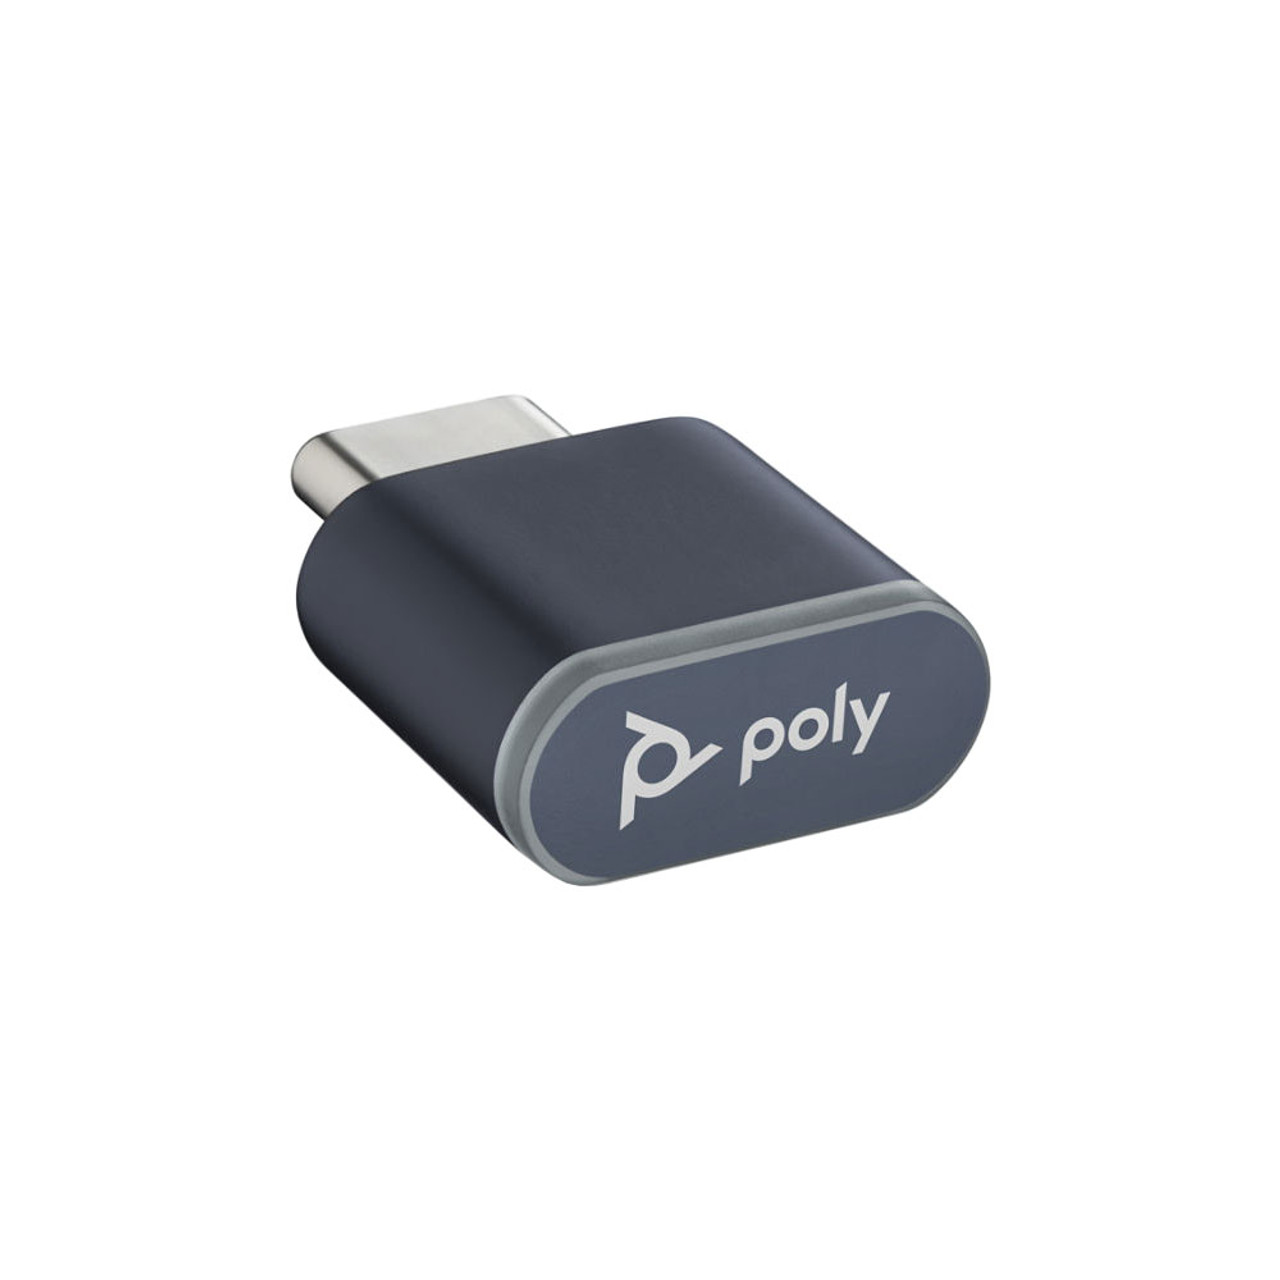 Poly Voyager 4310 MS Teams avec Dongle USB-C